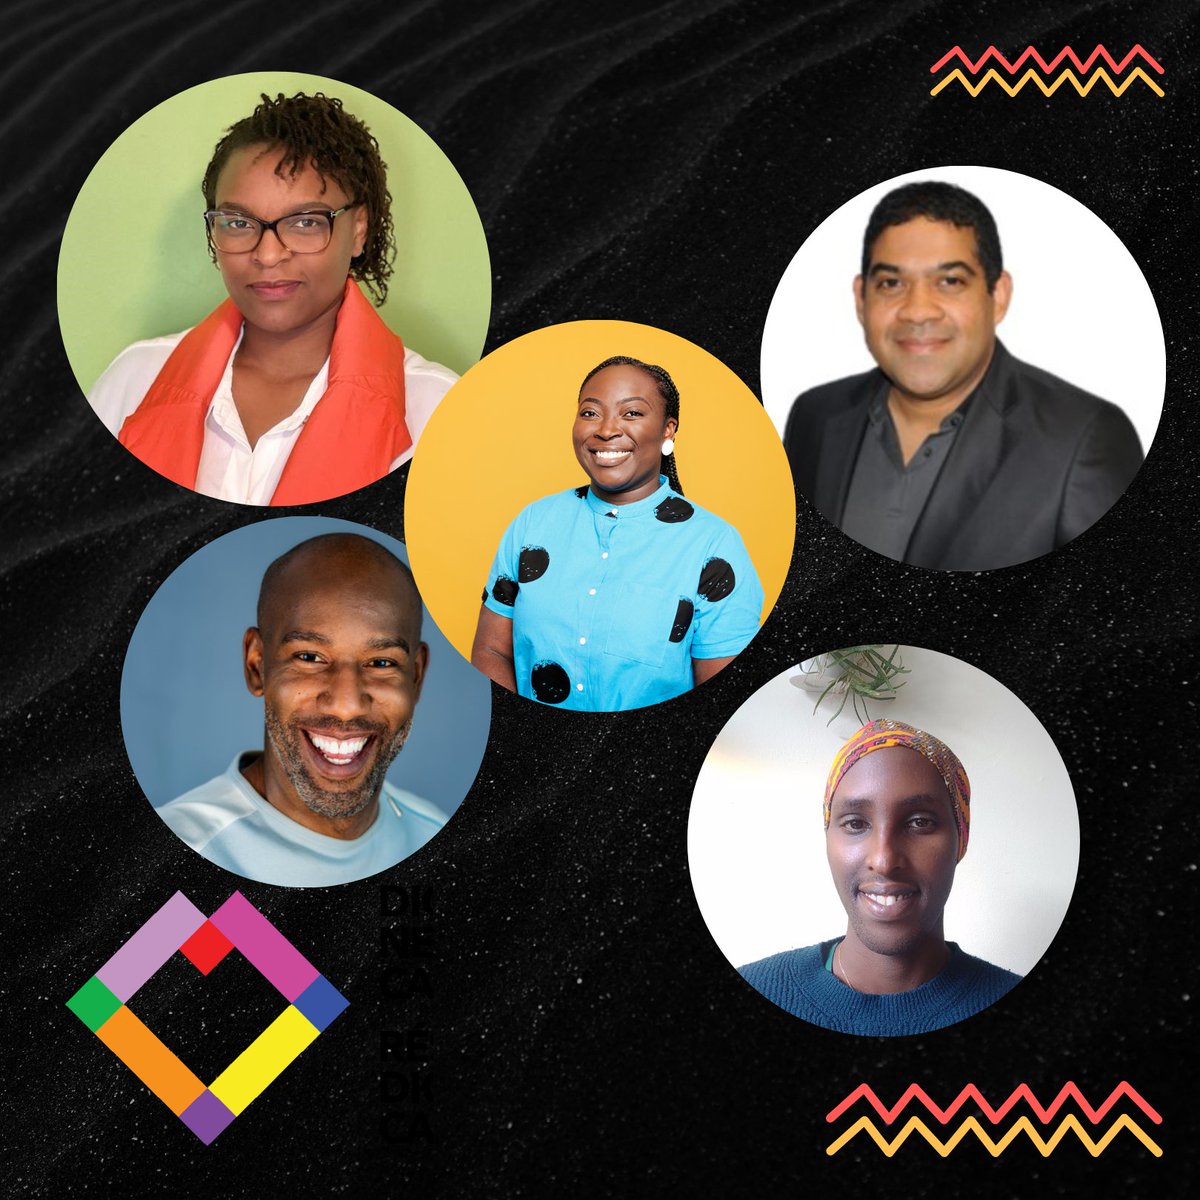 It's Black History Month and Dignity Network Canada celebrates Black leadership on our Board of Directors! #BlackHistoryMonth #BlackExcellence #BHM2023